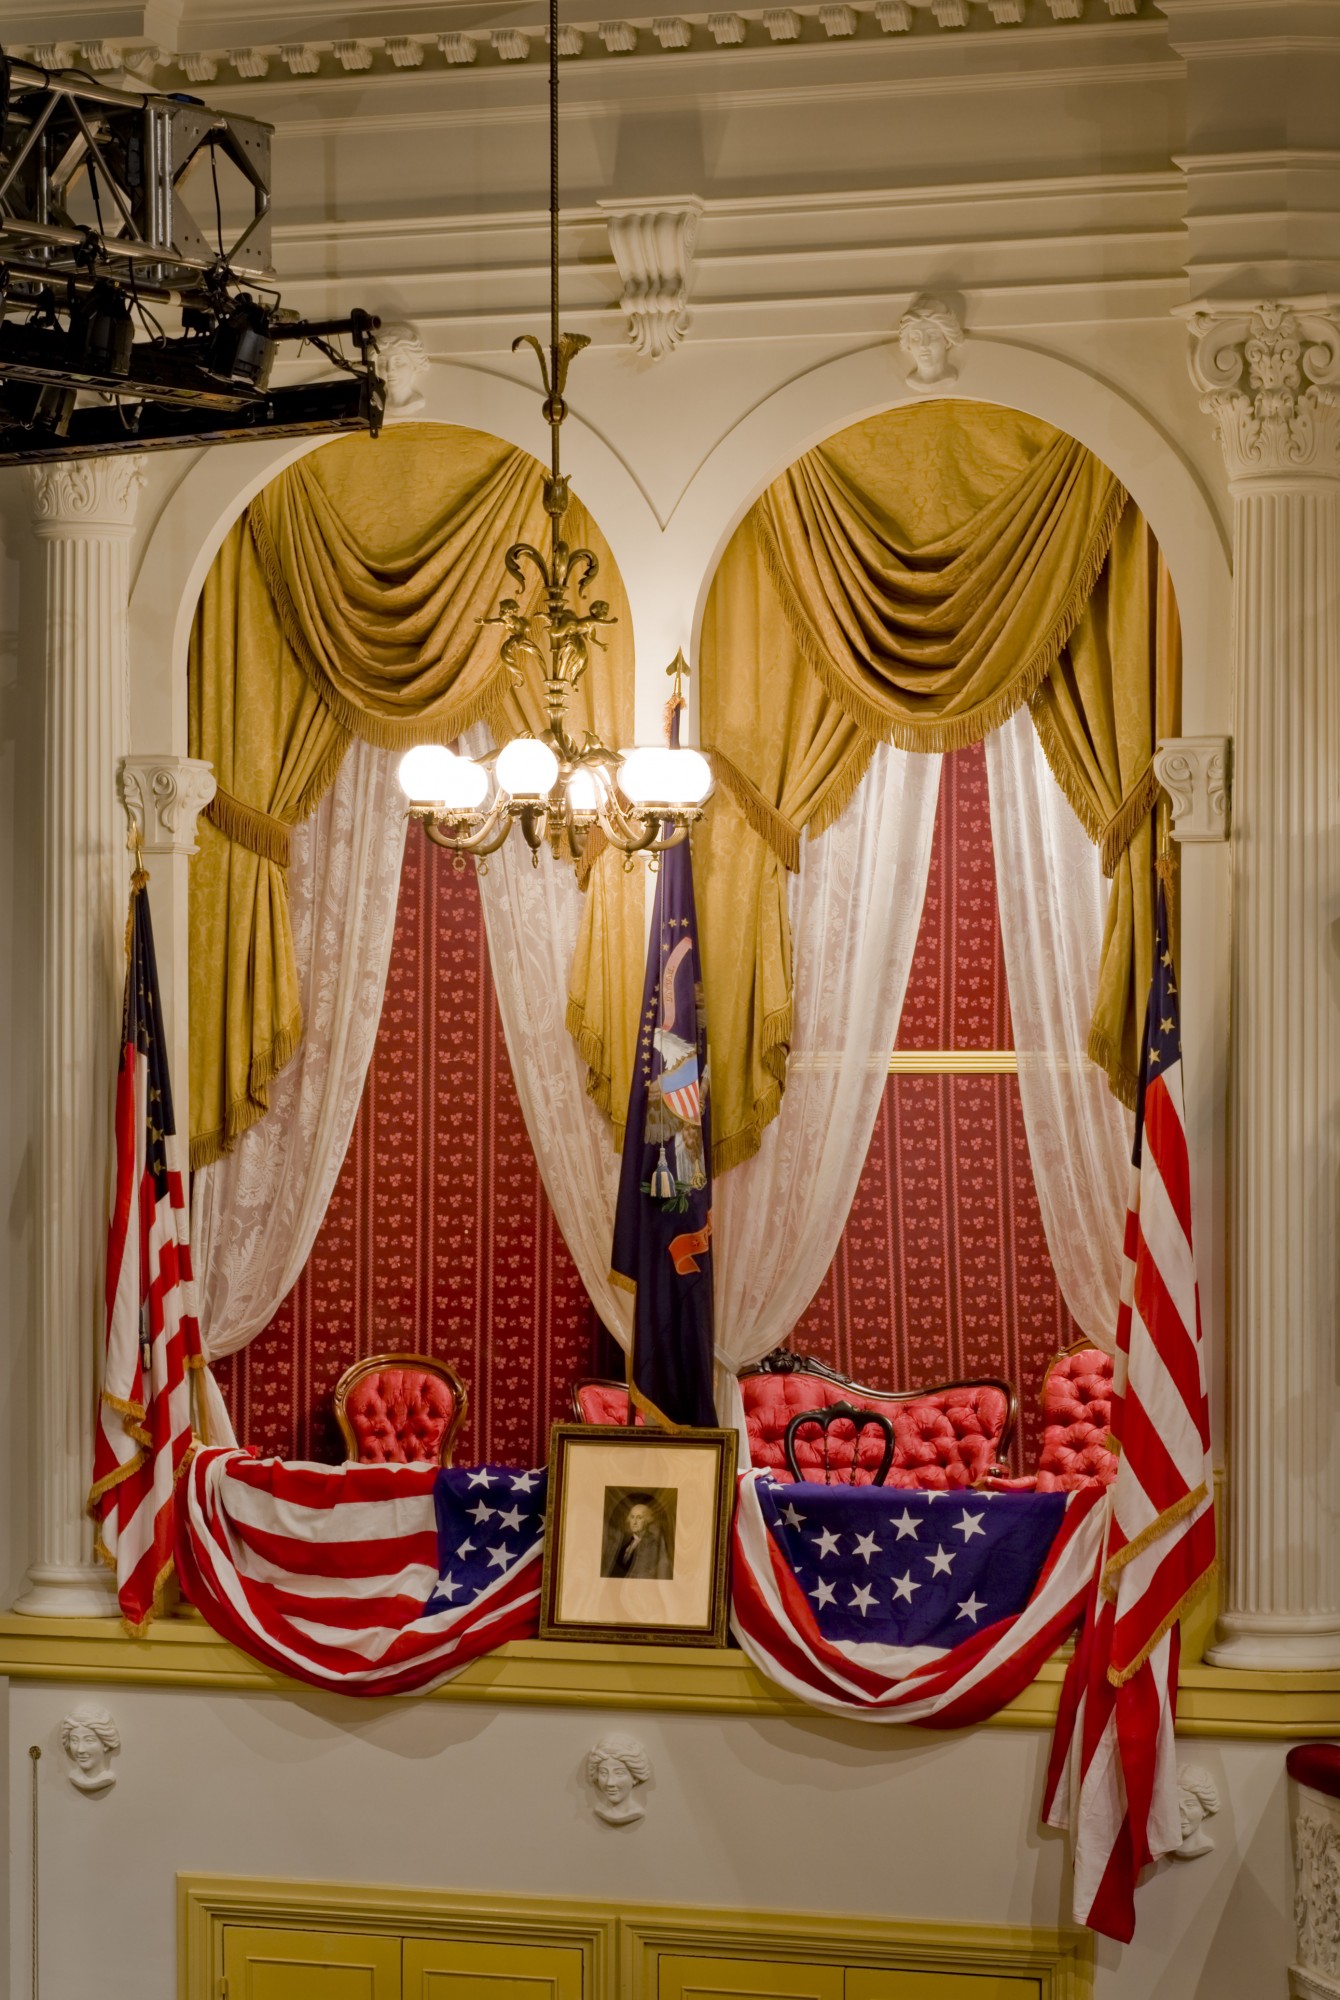 Interior photo of the Presidential Box where Lincoln and his party sat on the night of April 14, 1865. The phtoo shows the white balcony theatre box draped with golden curtains and flags. There also is a framed portrait of George Washington at the center of the balcony railing.